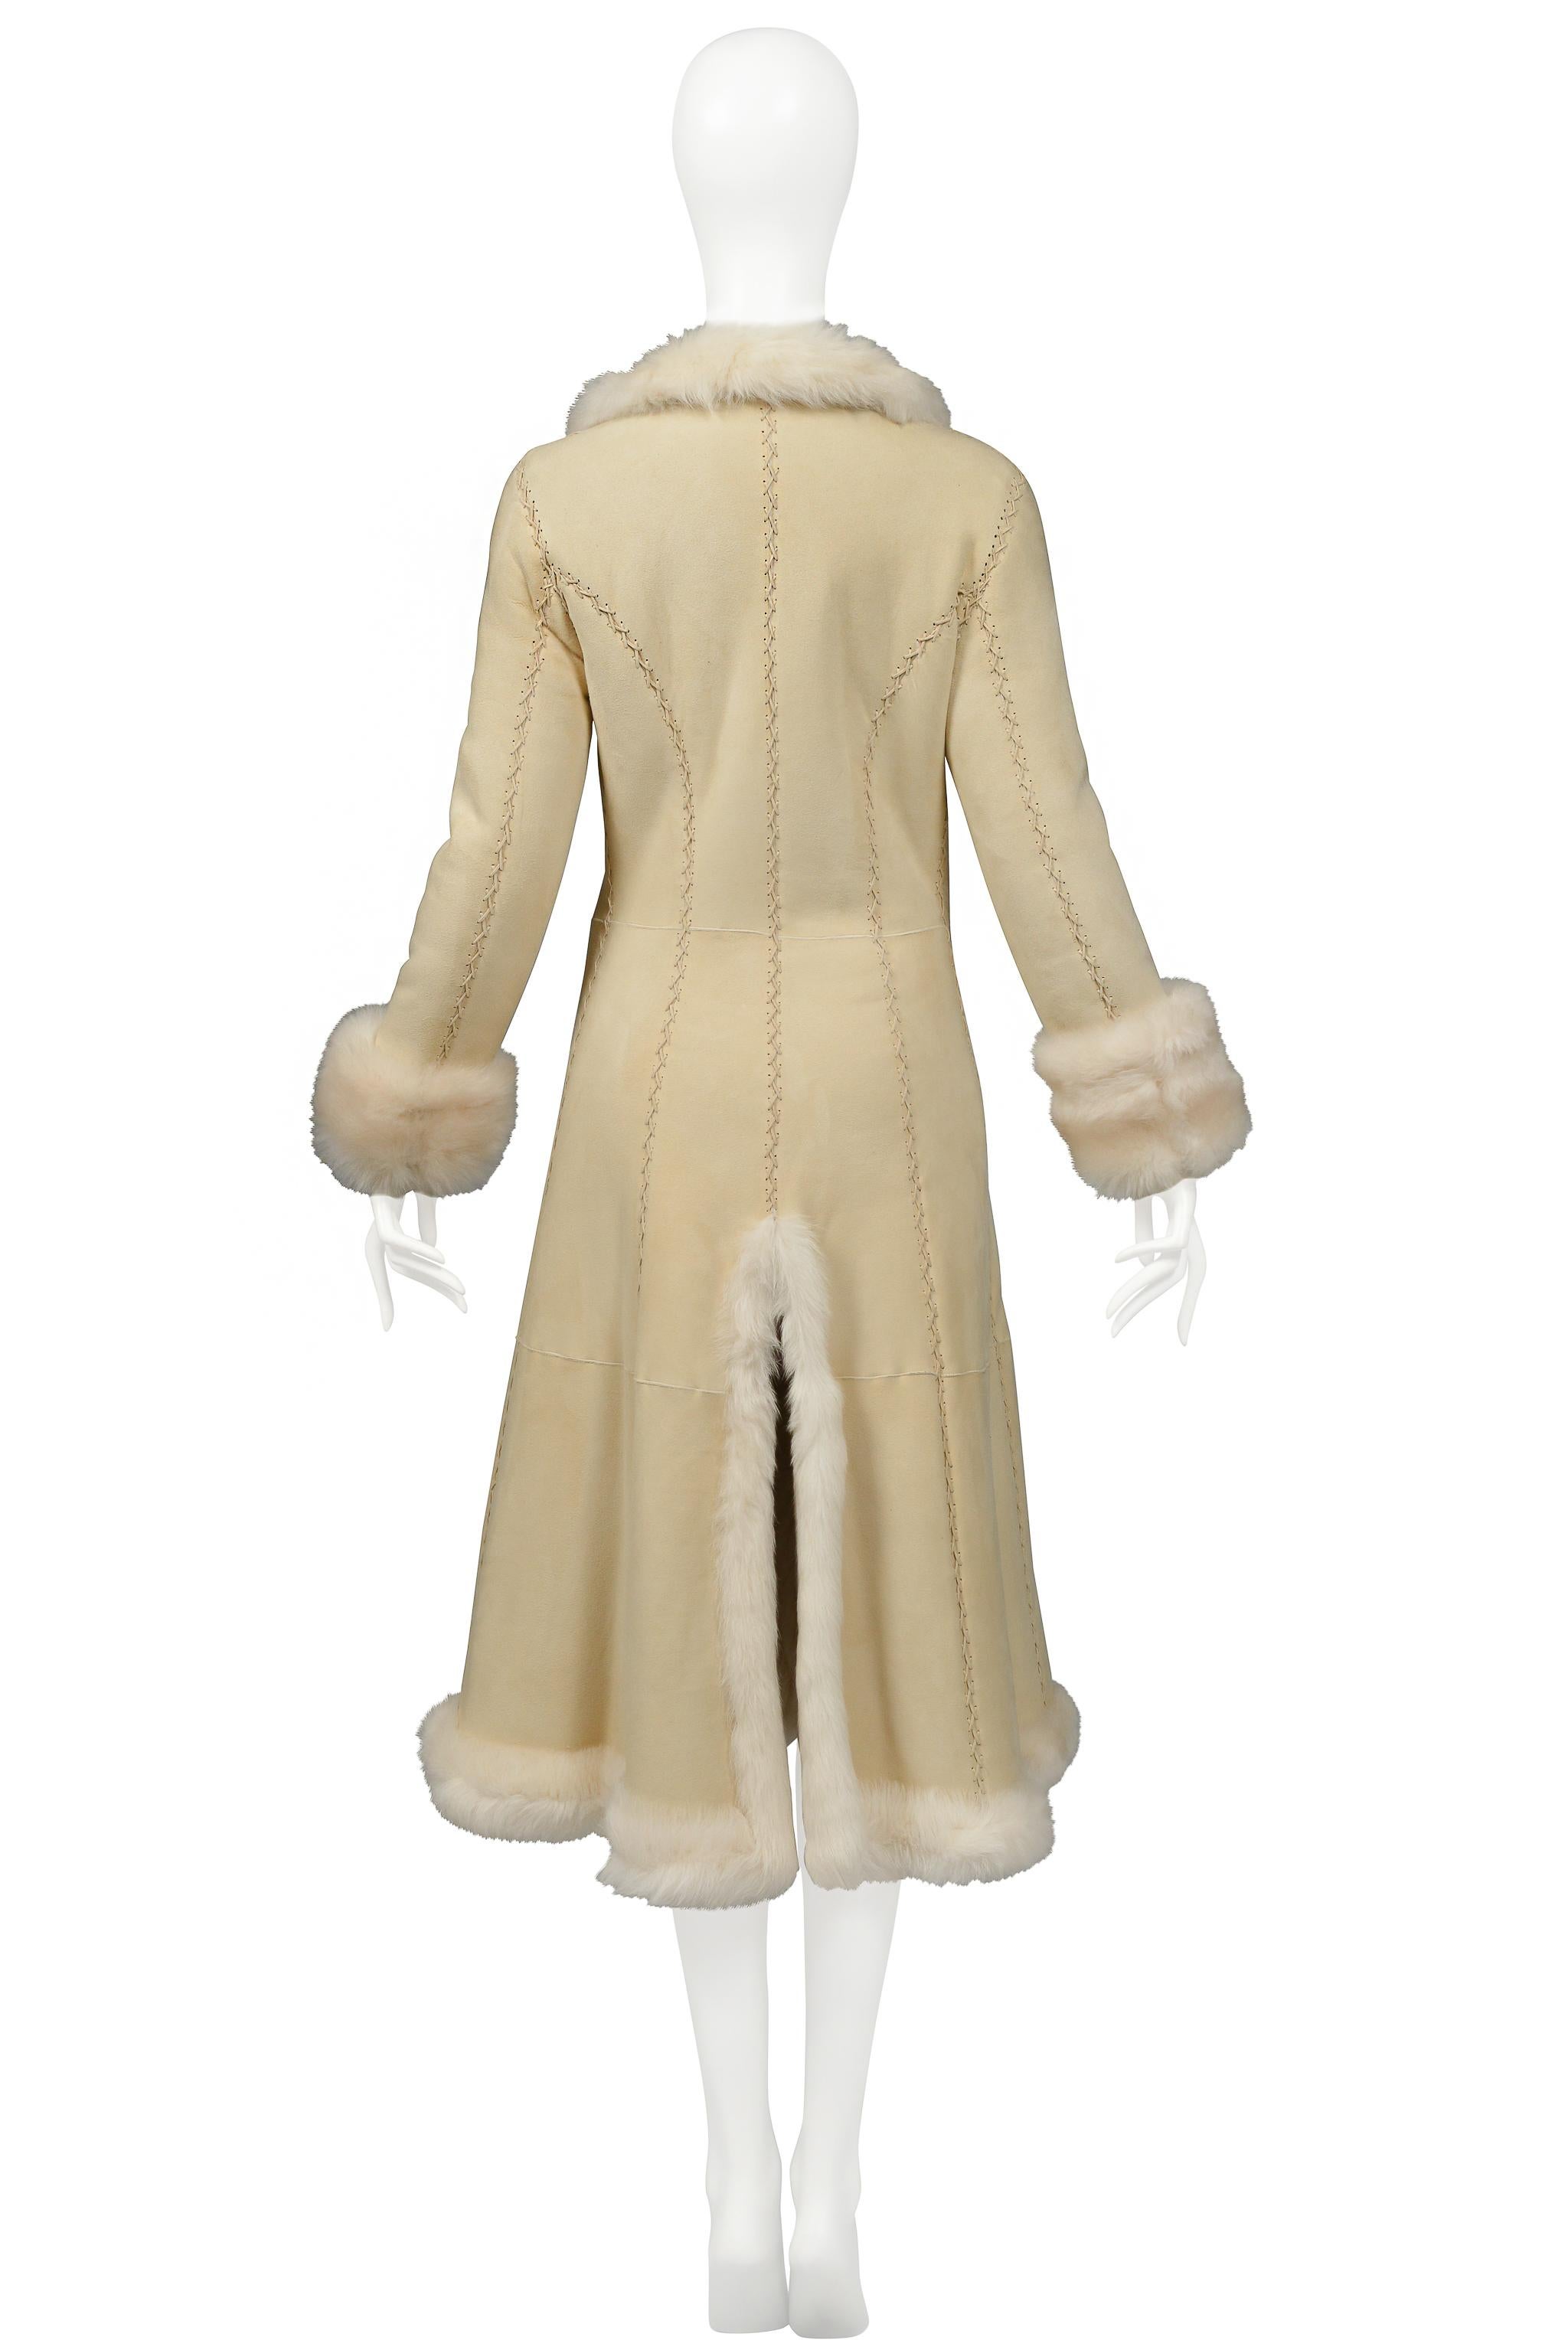 Iconic Alexander Mcqueen Off-White Suede Coat With Luxe Shearling Interior 3